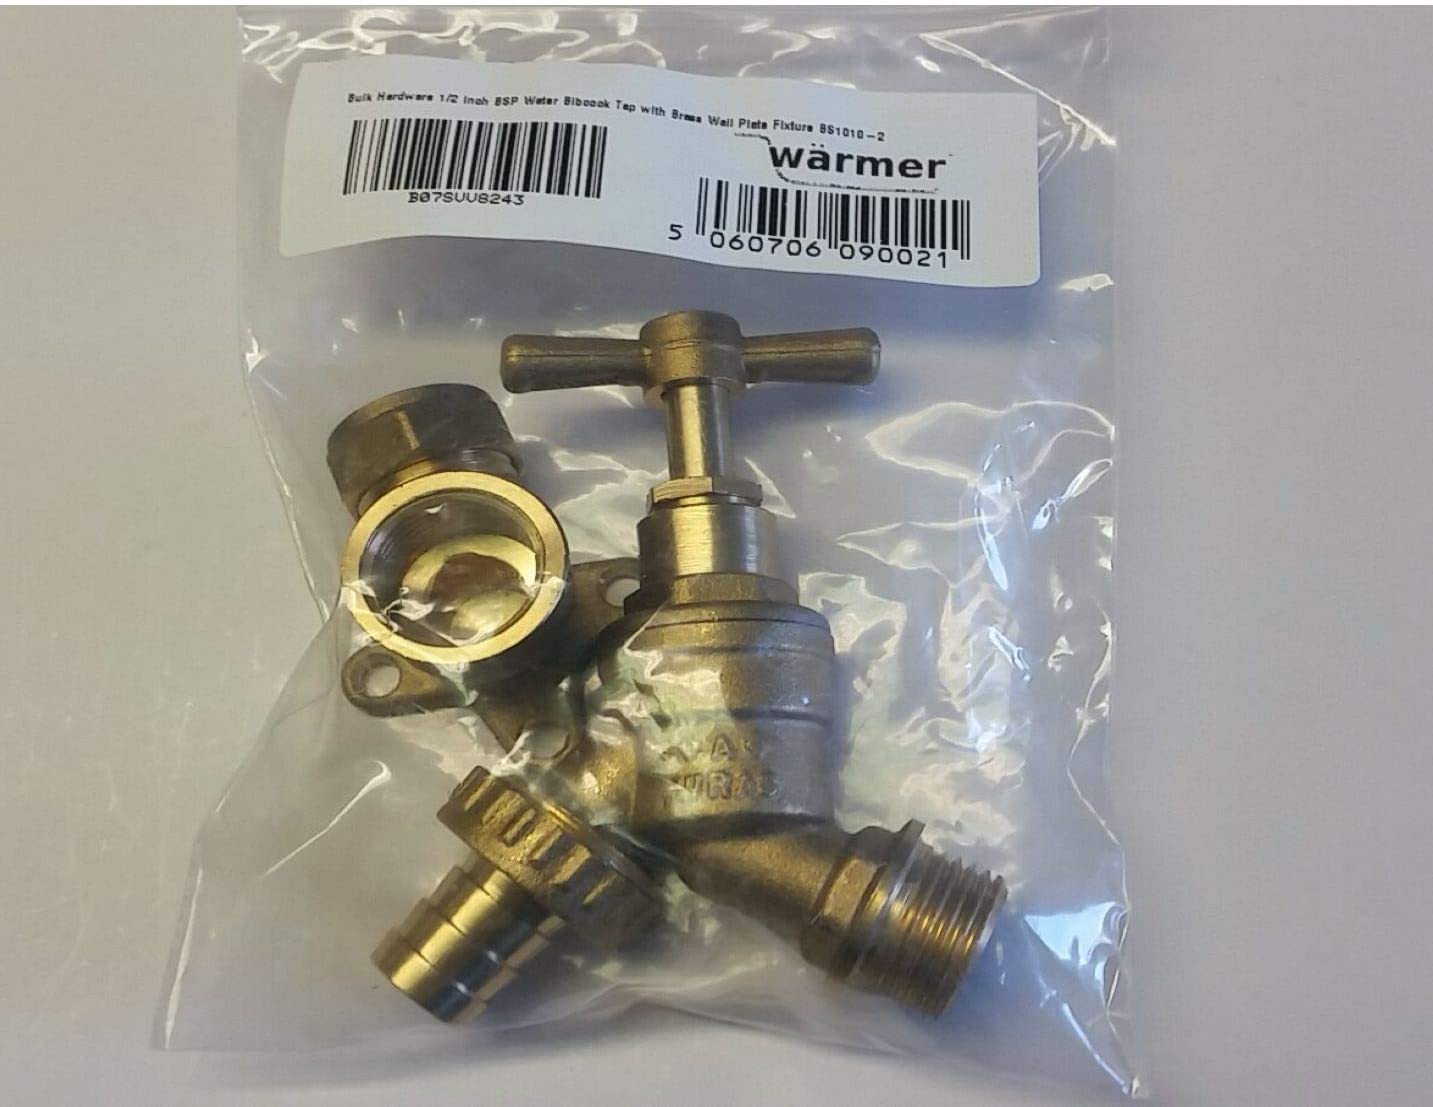 Bulk Hardware 1/2 inch BSP Water Taps with Brass Wall Plate Fixture BS1010-2 